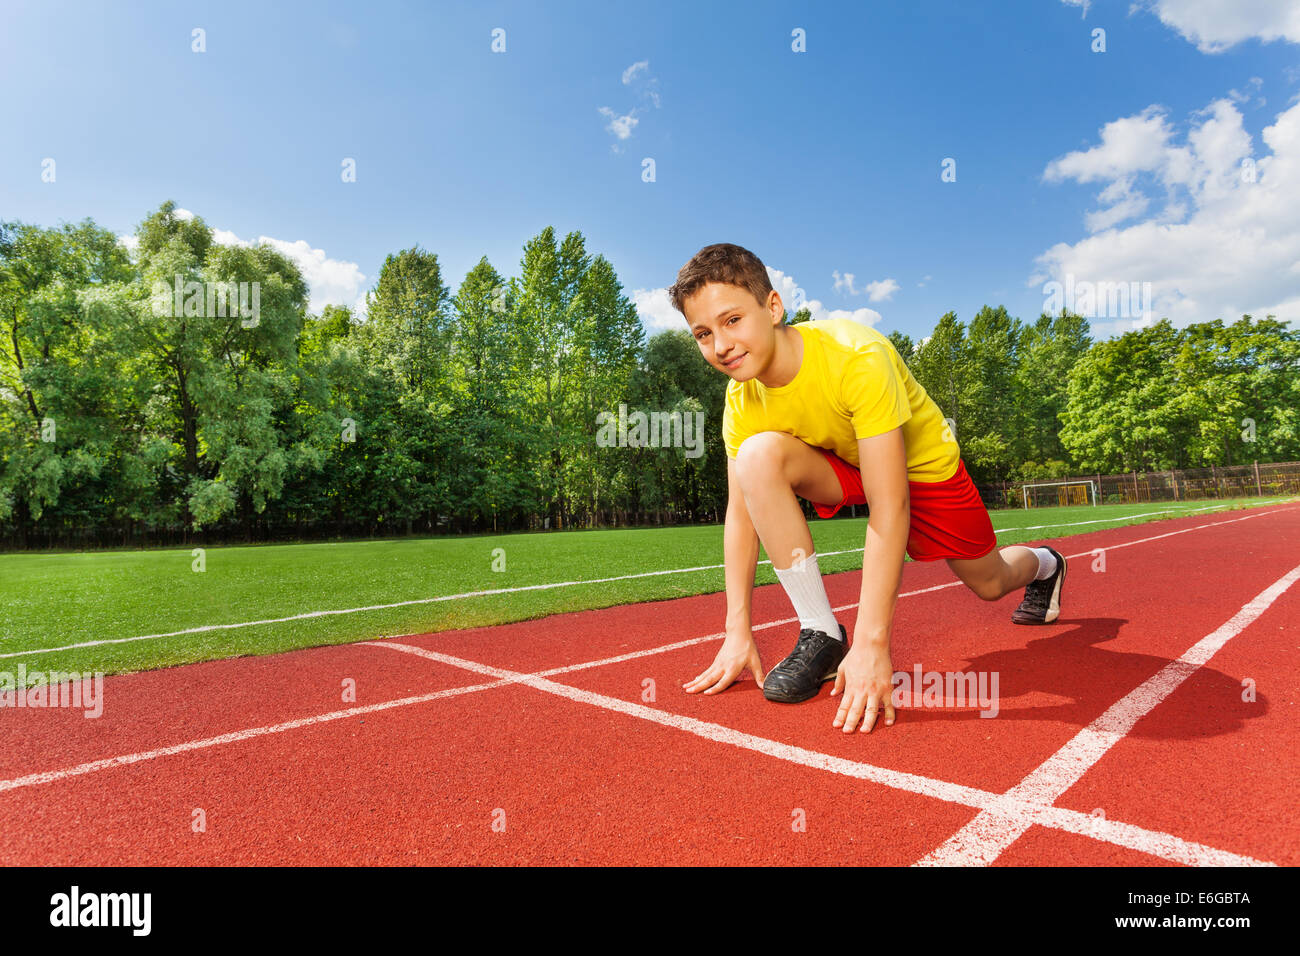 Boy in ready position on one bend knee to run Stock Photo